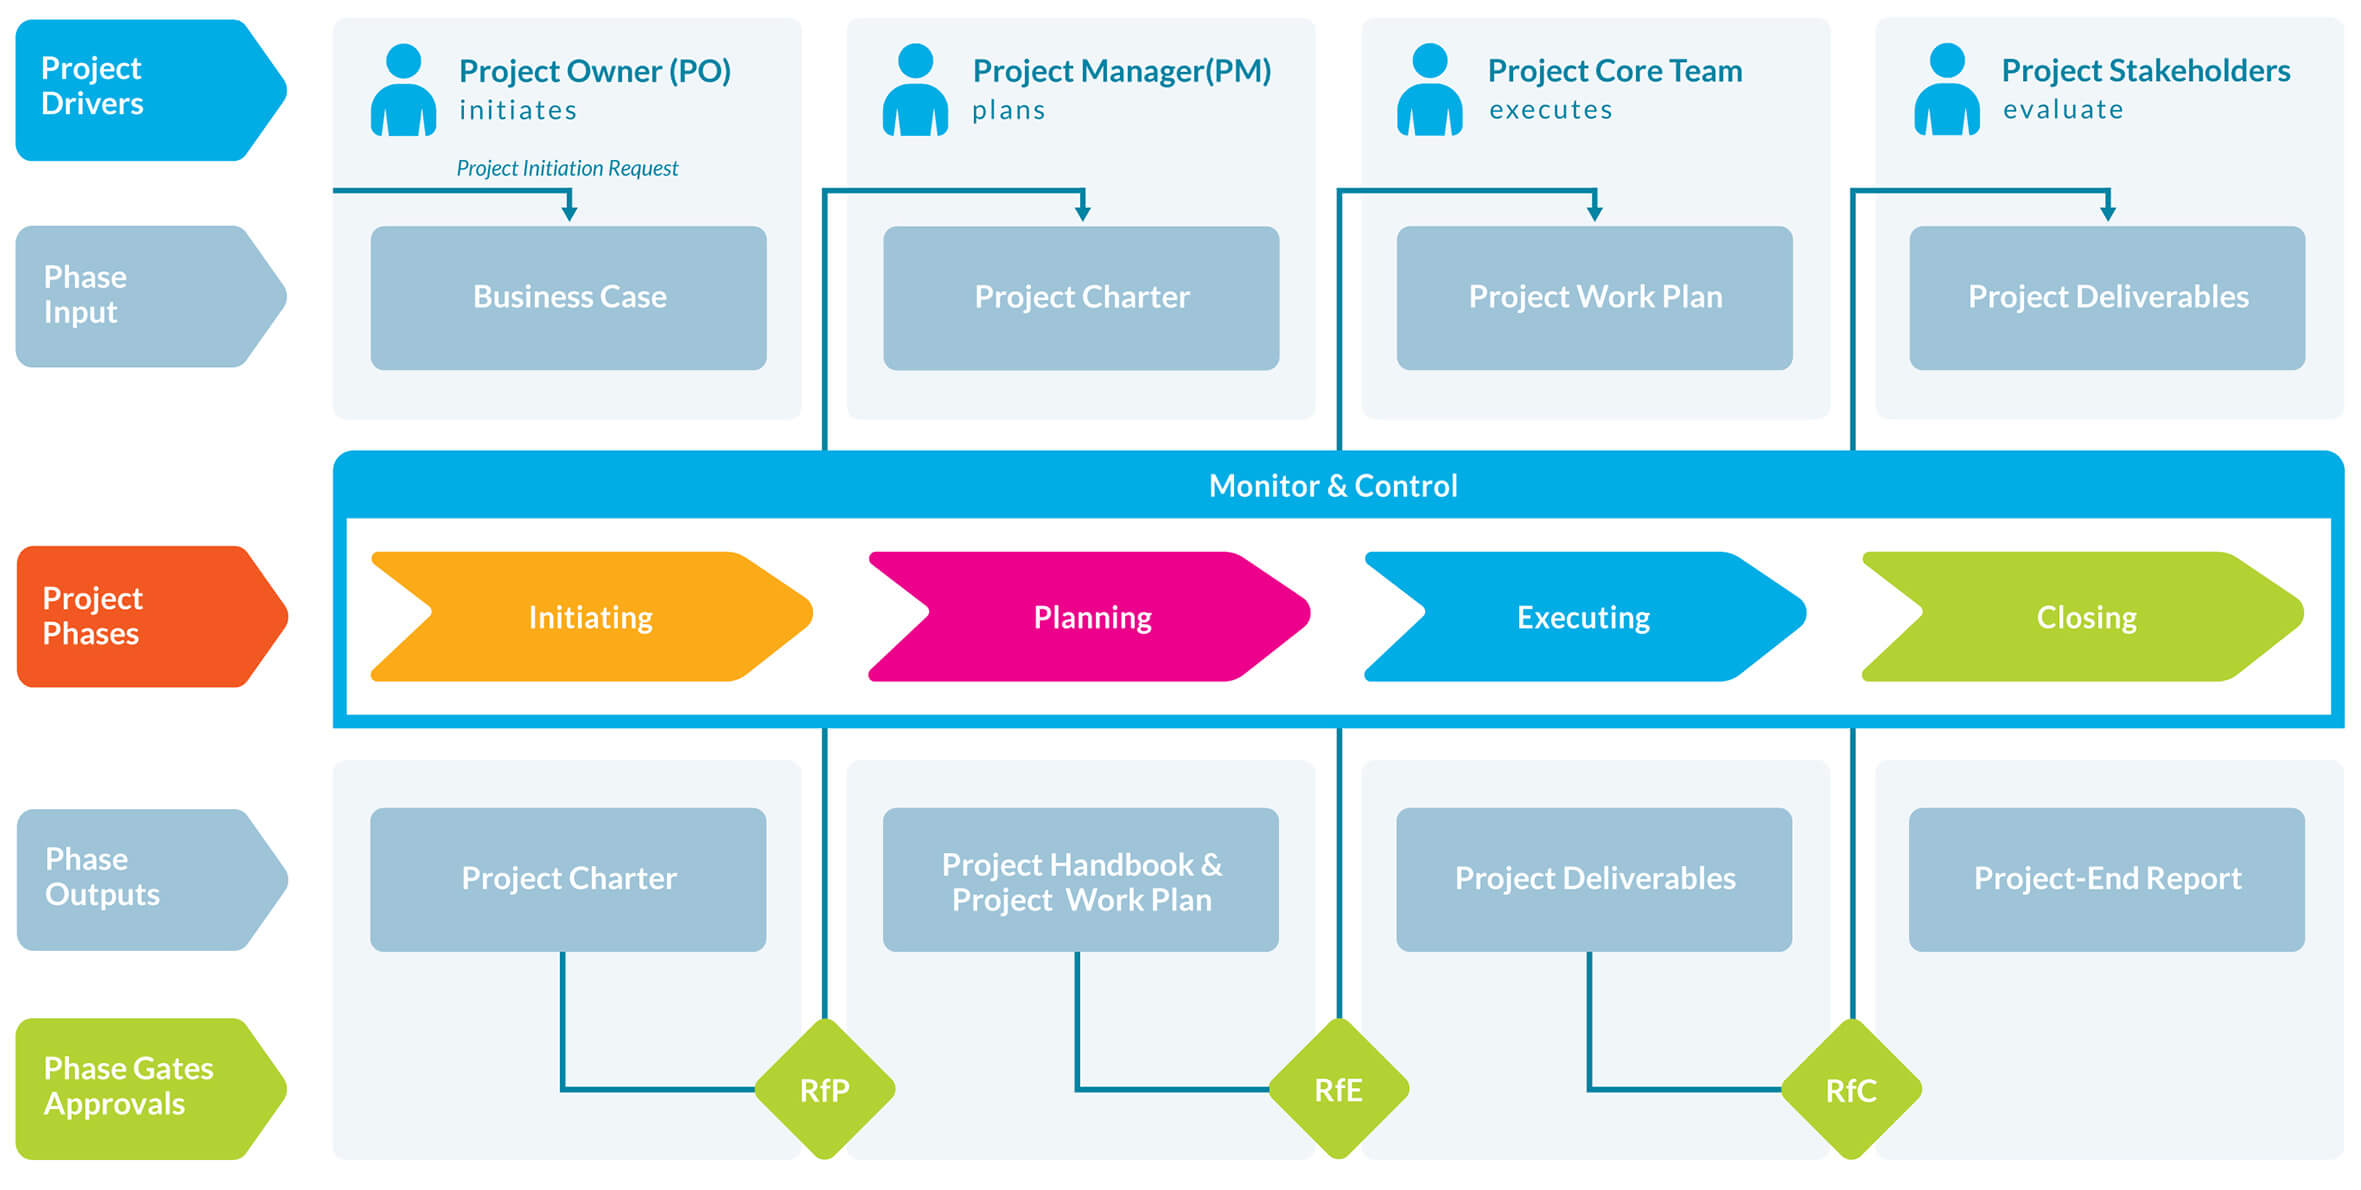 pm2 project management methodology guide